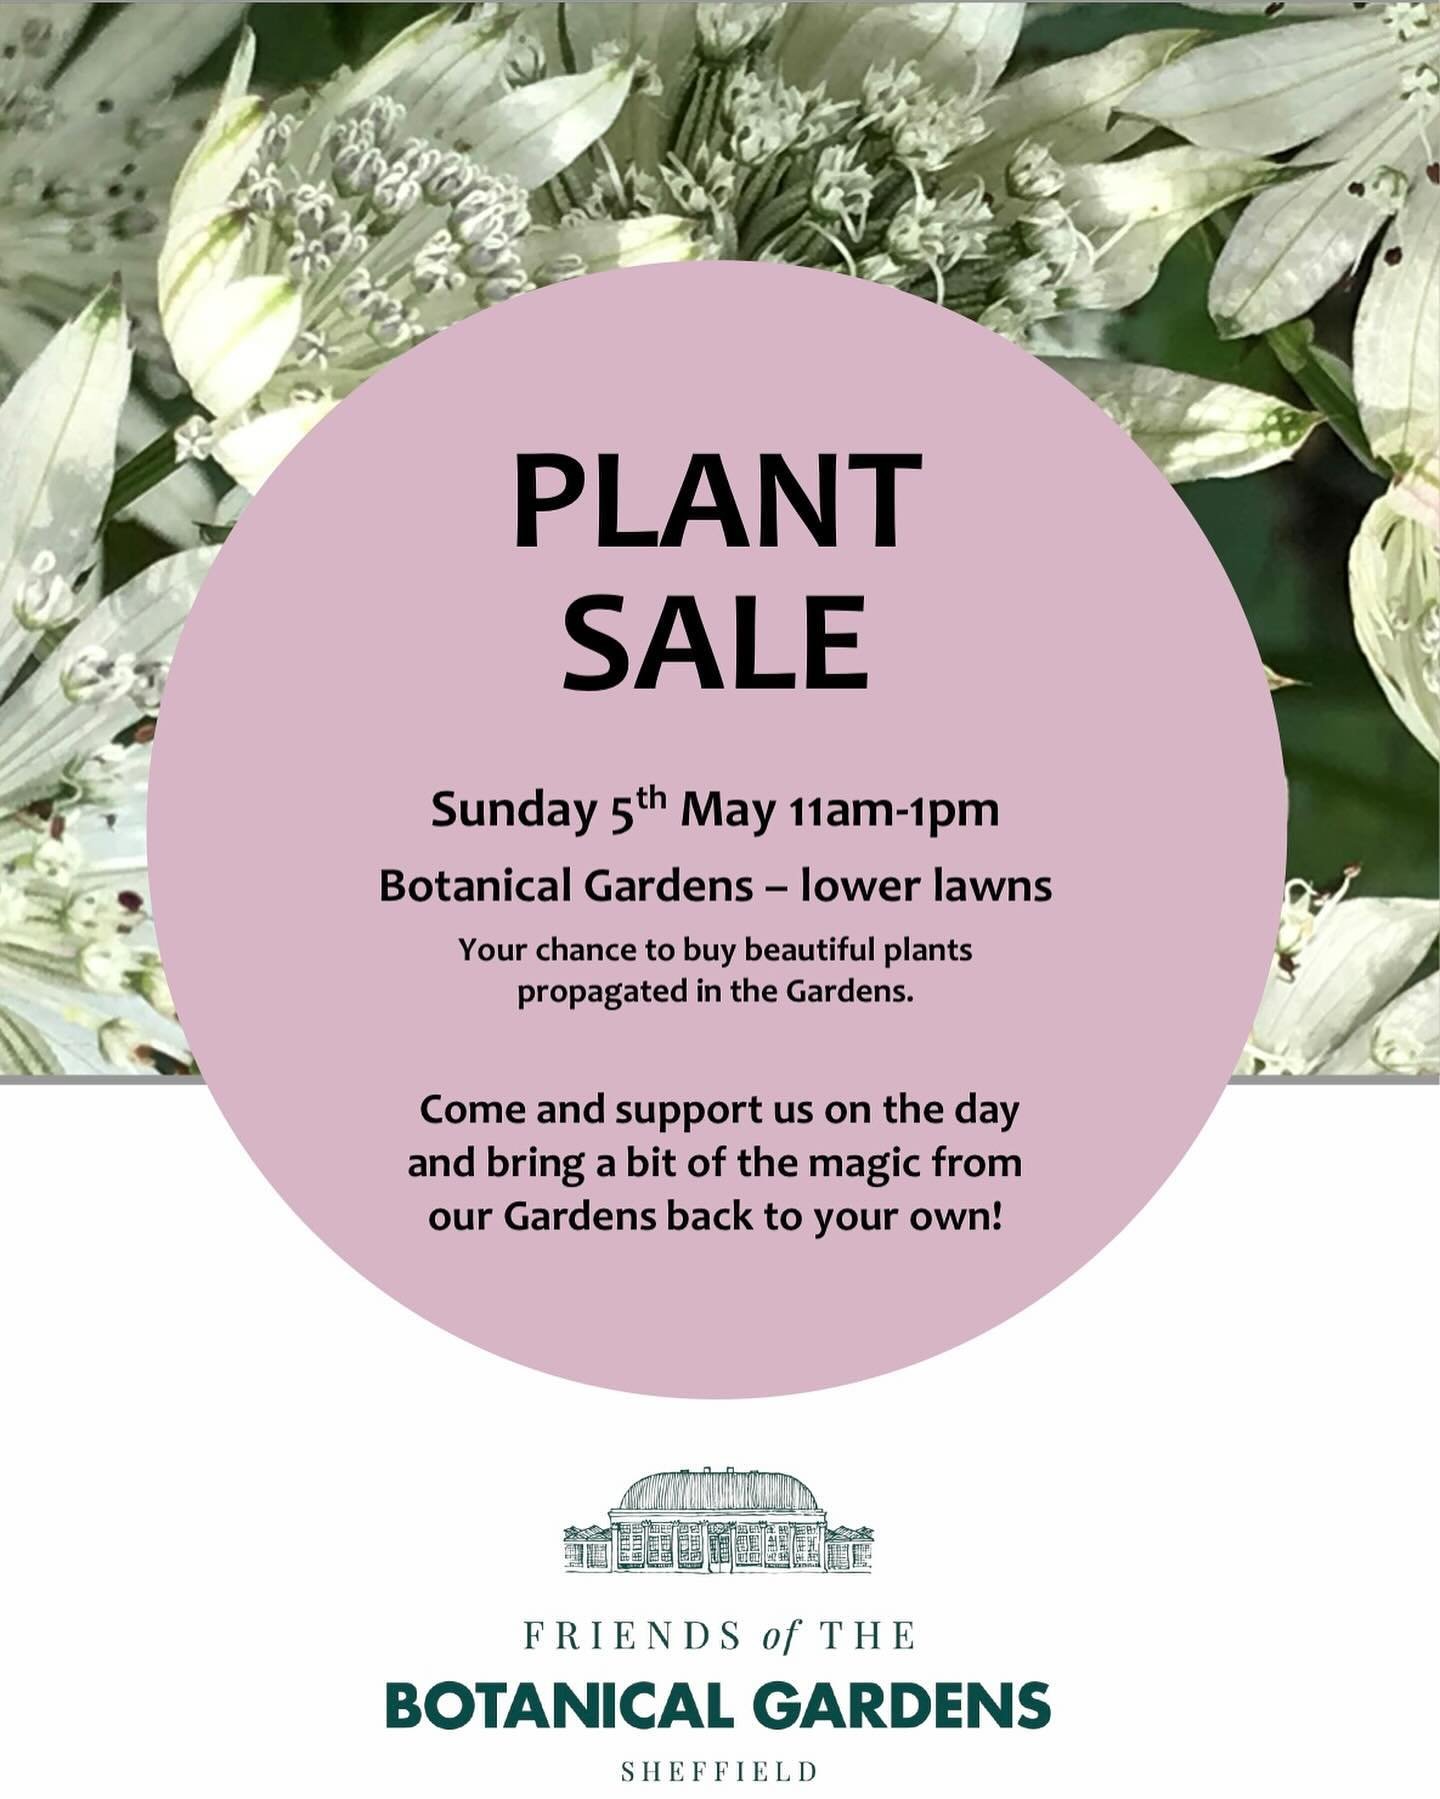 Save the dates for the Bank Holiday weekend&hellip;&hellip;.

On Sunday 5 May we&rsquo;re holding our first @fobsheffield Plant Sale in #sheffieldbotanicalgardens - 11 - 1pm on the lower lawns (or in the greenhouses if wet)

On Saturday, Sunday and M